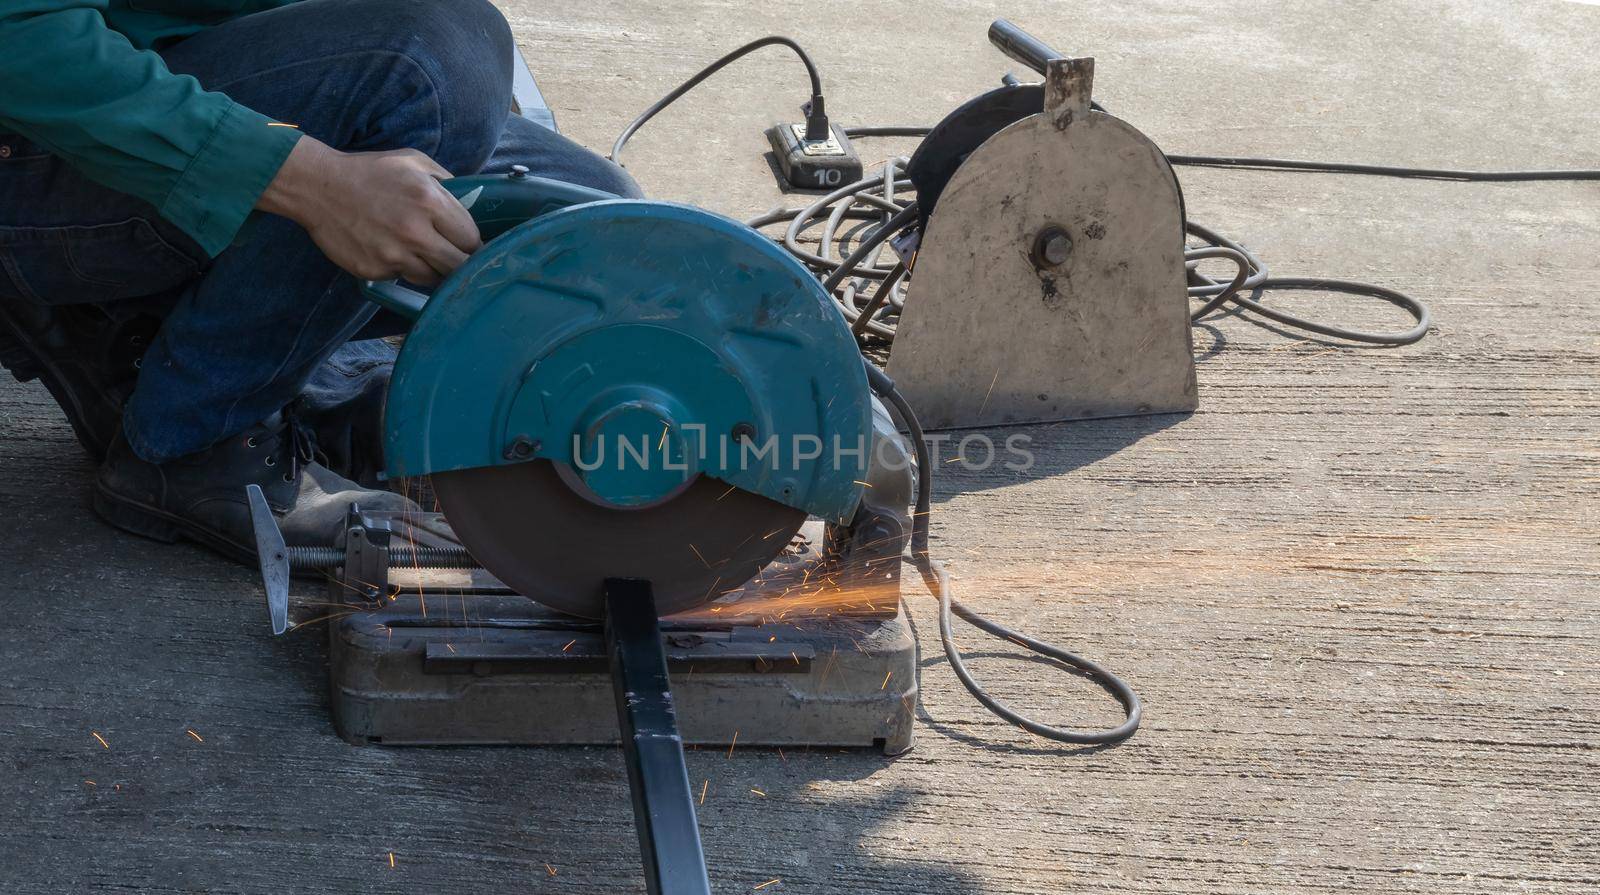 A technician is cutting steel using a cutting machine by suththisumdeang